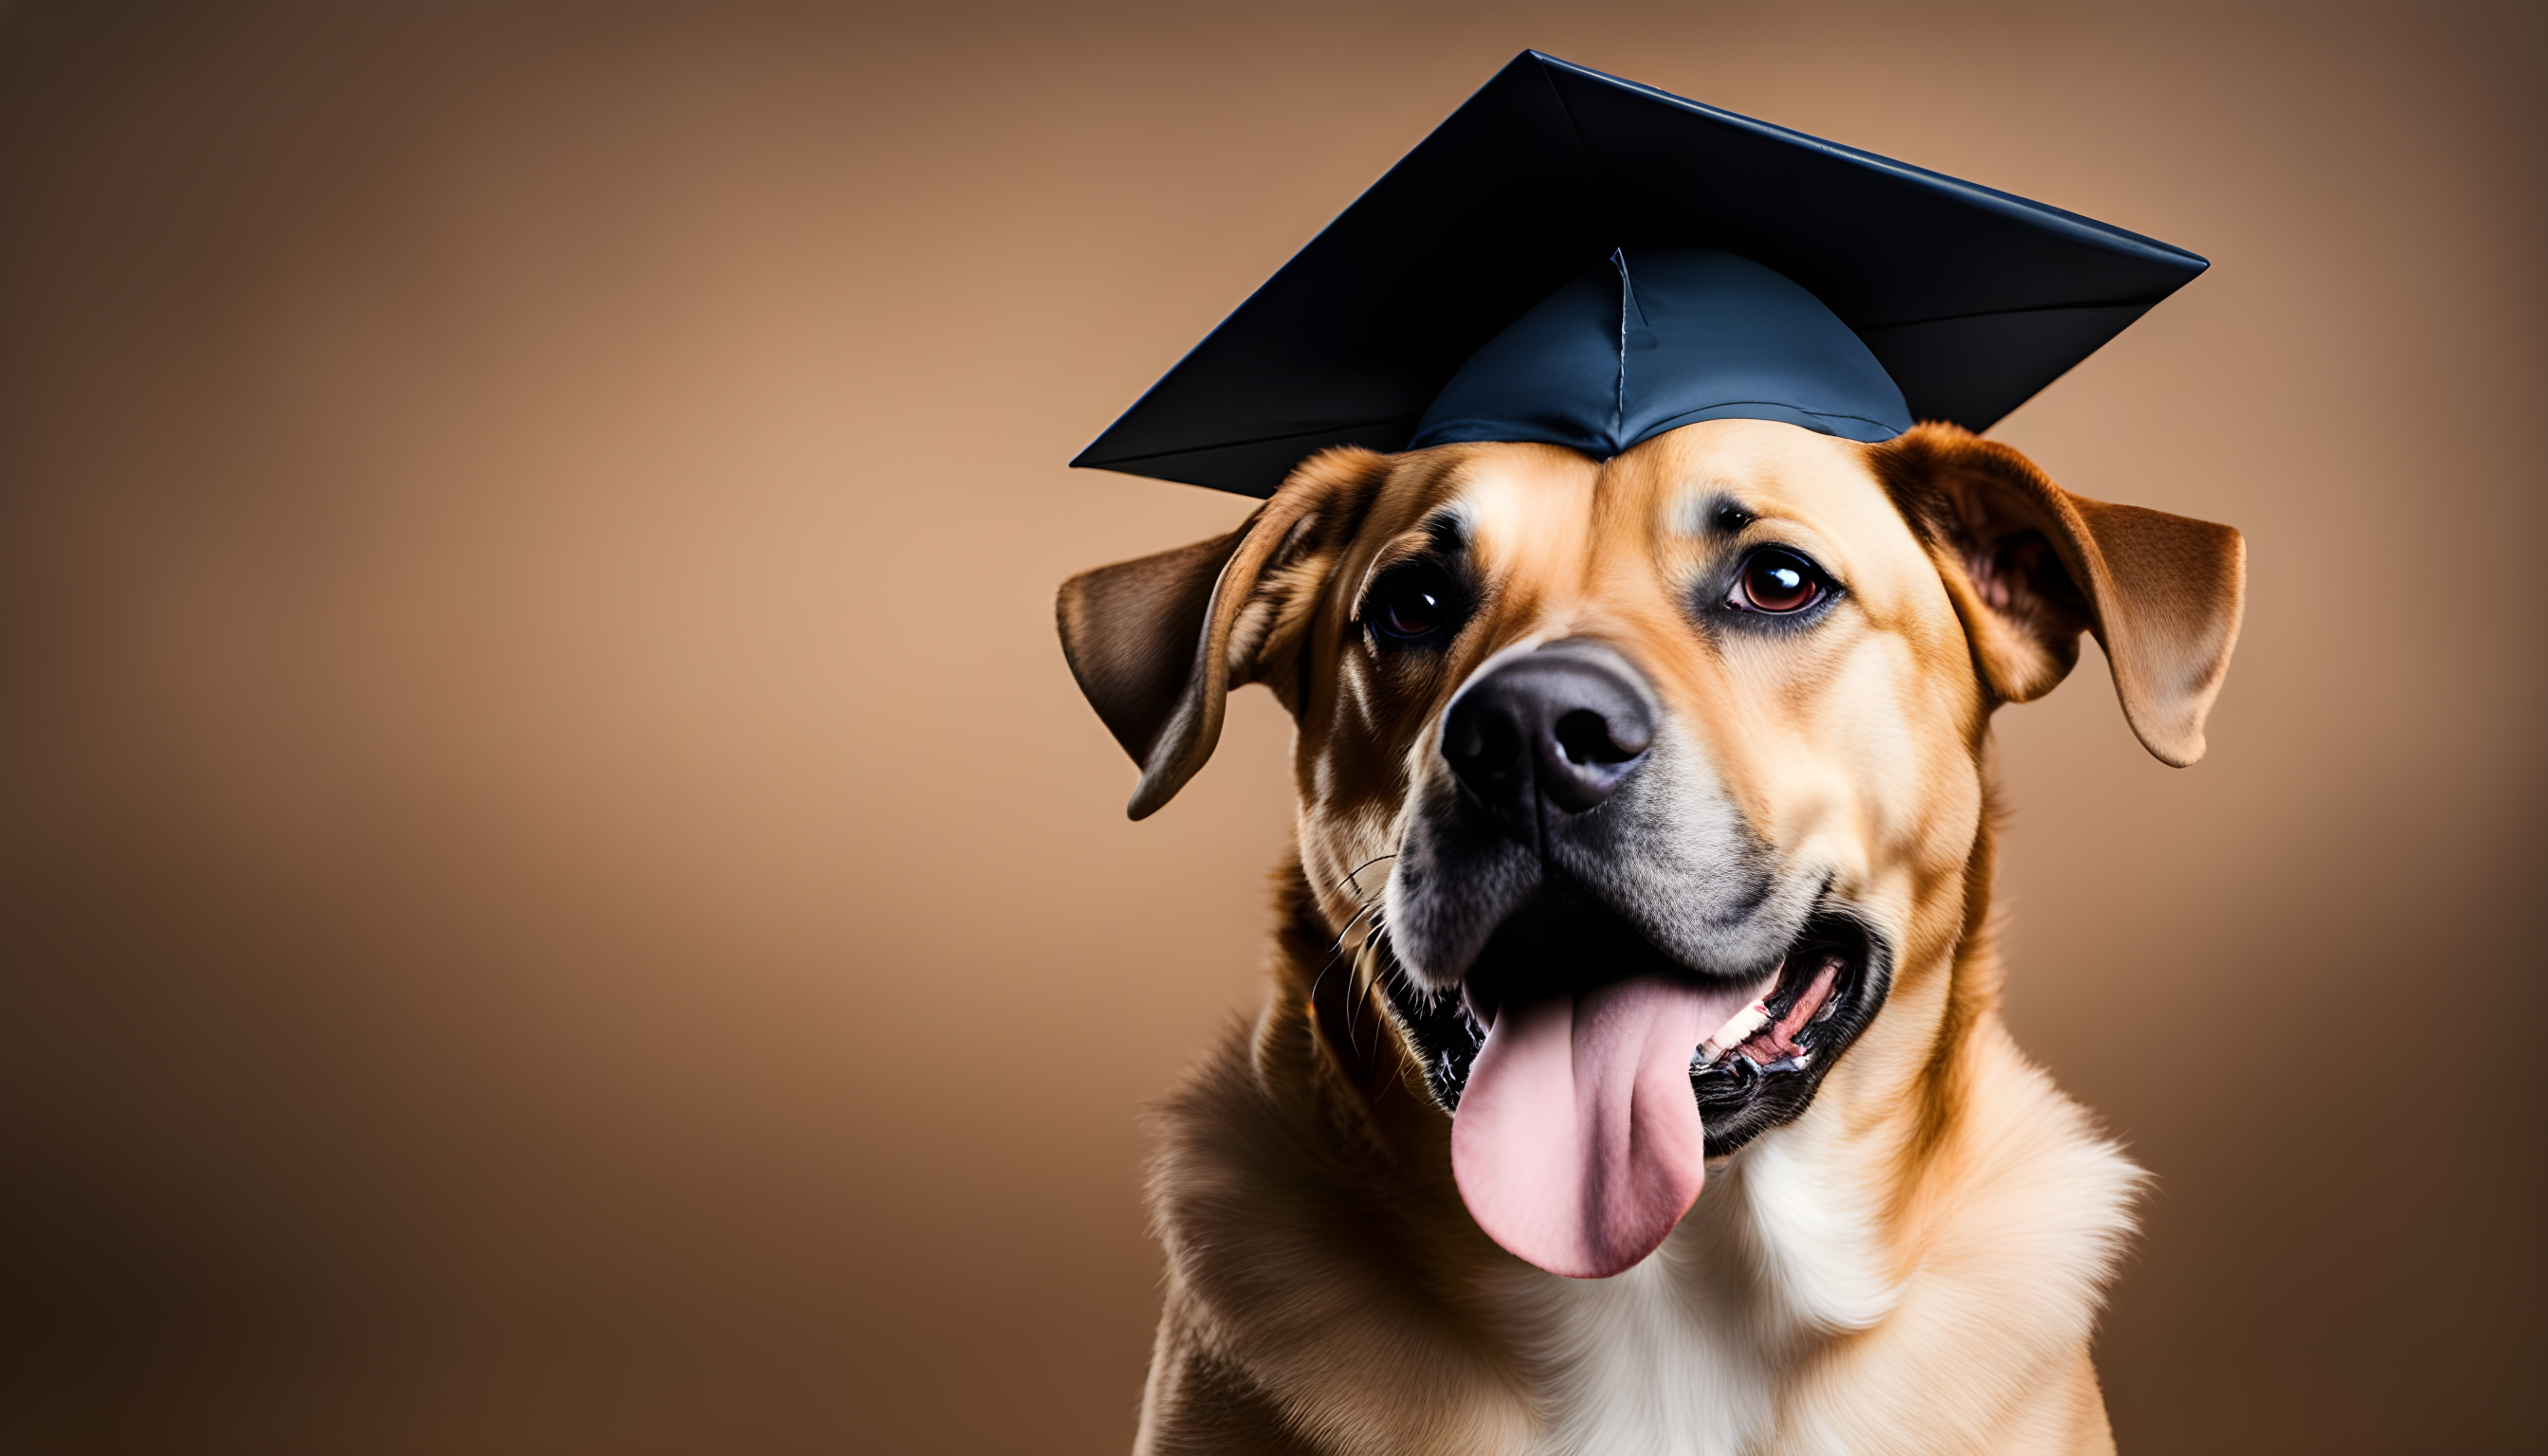 Adorable Boxador (Boxer Lab Mix) looking ridiculously cute in a graduation cap, proudly holding a diploma in its mouth. Because let's face it, if there was a Boxador University, your pup would totally grad!